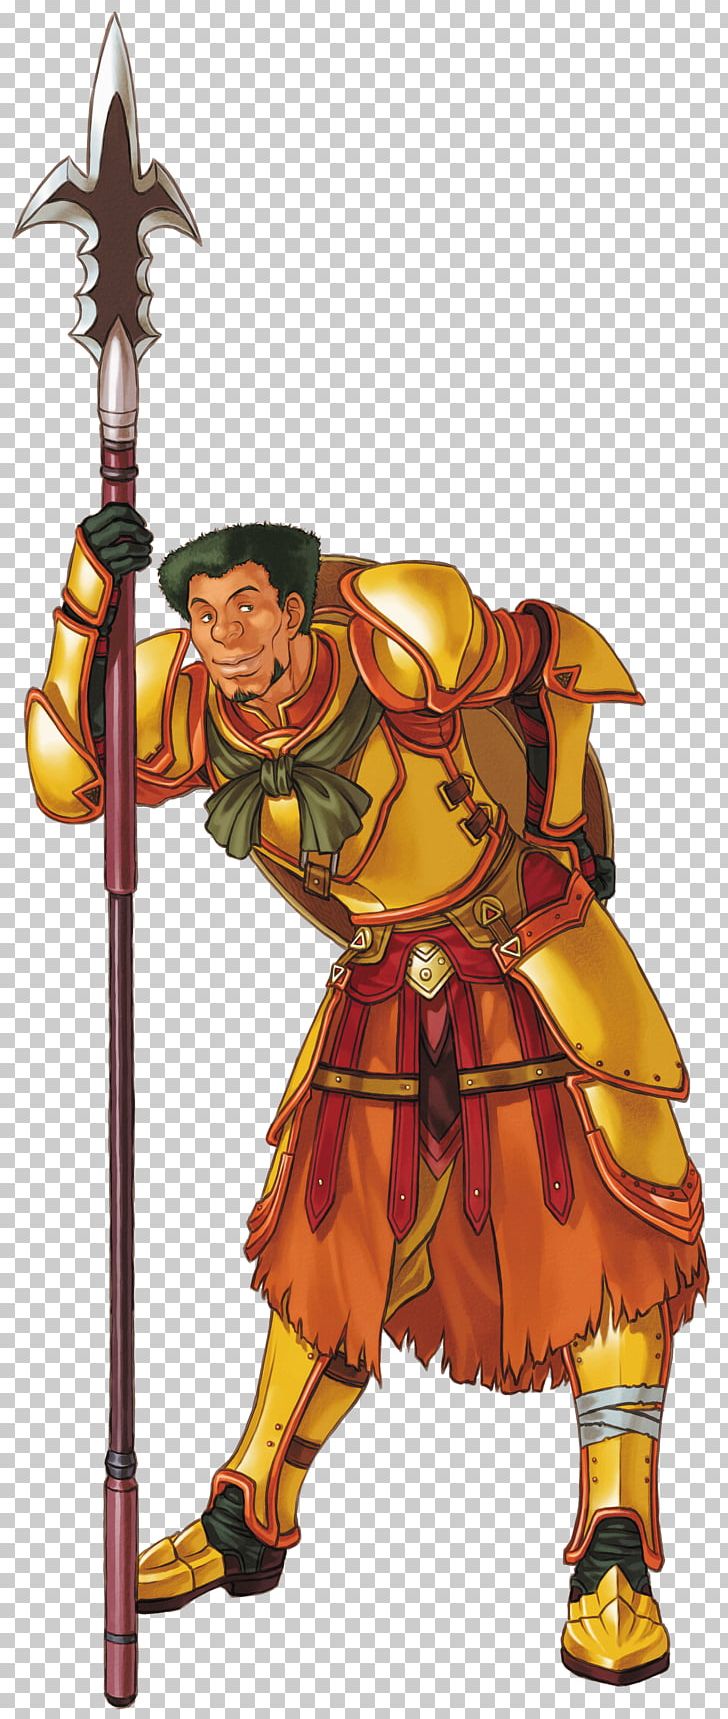 Fire Emblem: Path Of Radiance Fire Emblem: Radiant Dawn Fire Emblem: Shadow Dragon Video Game Wii PNG, Clipart, Armour, Art, Cold Weapon, Concept Art, Costume Design Free PNG Download